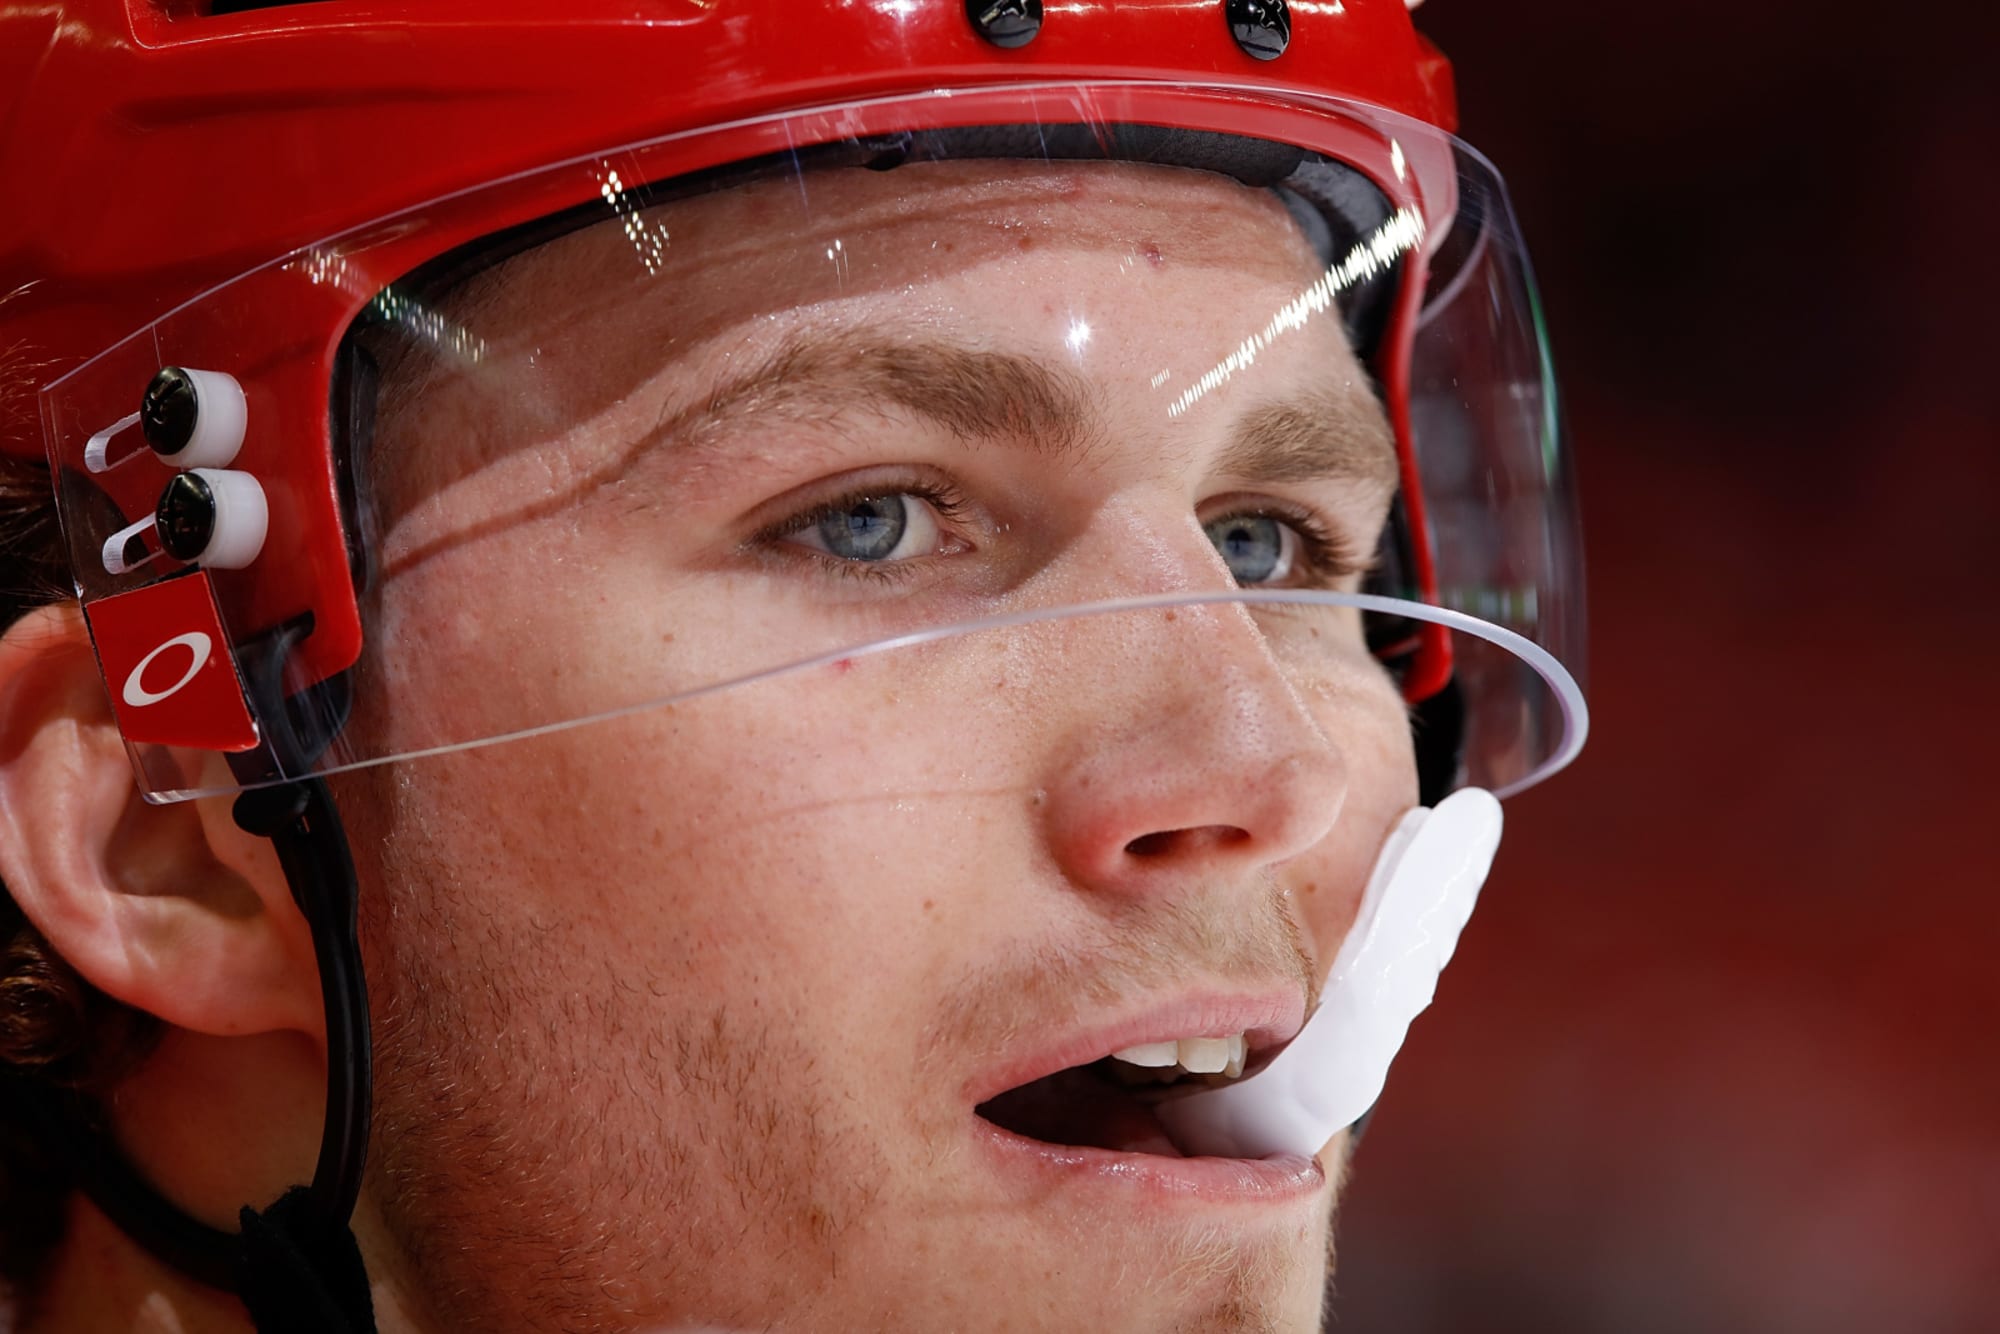 Is Matthew Tkachuk related to Keith Tkachuk? Are they related? - News